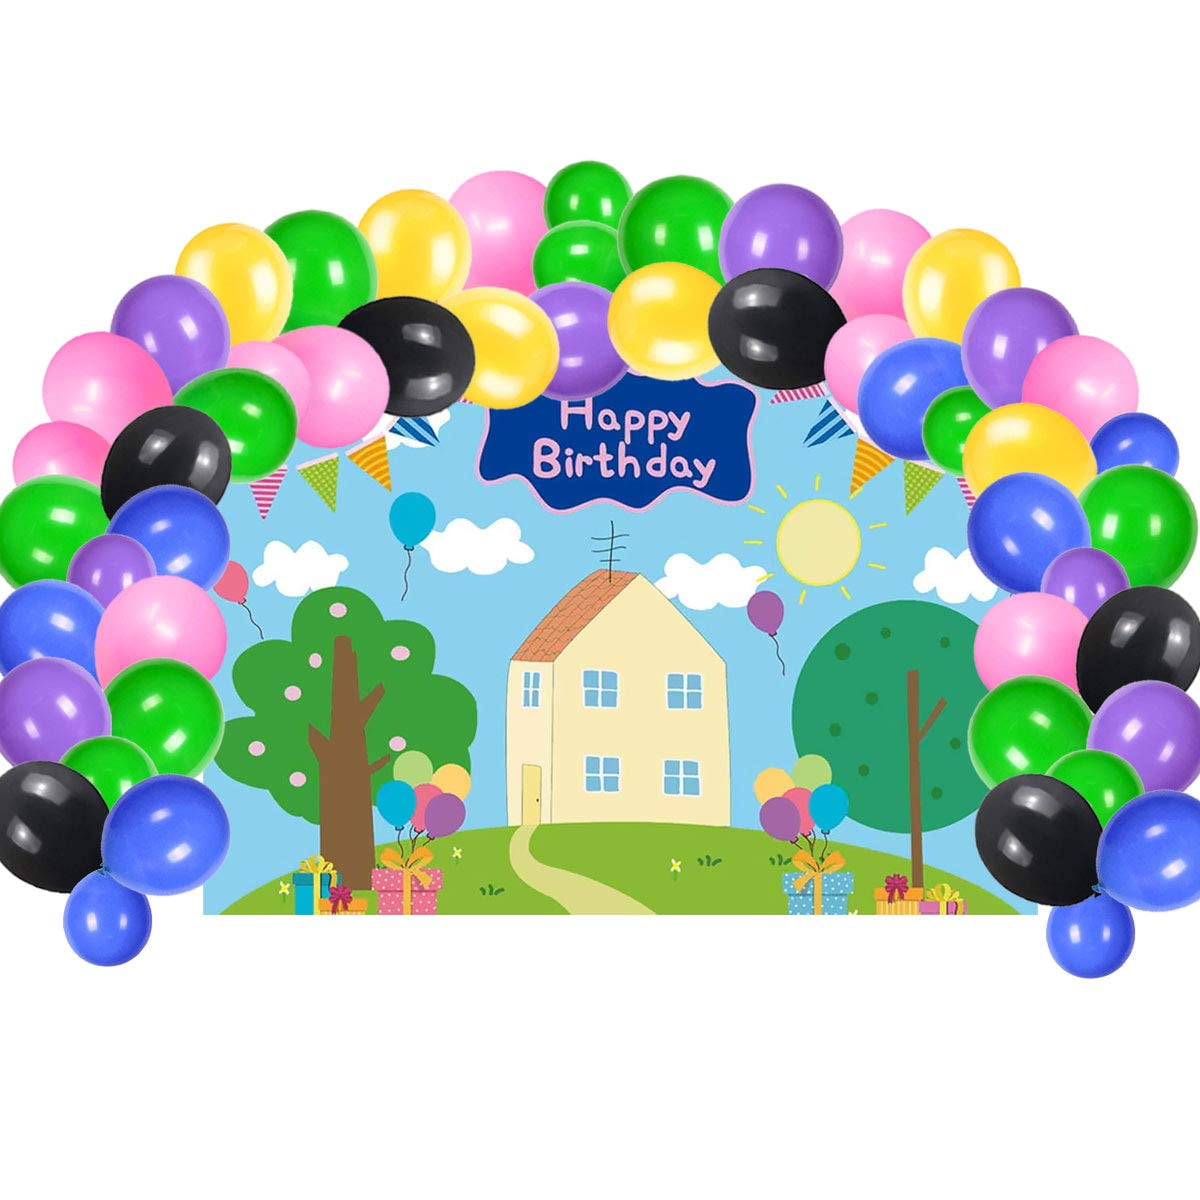 Cute Happy Birthday Party Supplies, Backdrop With Balloons Decoration Kit  For Kids Photo Background, Gift For Girls or Boys 